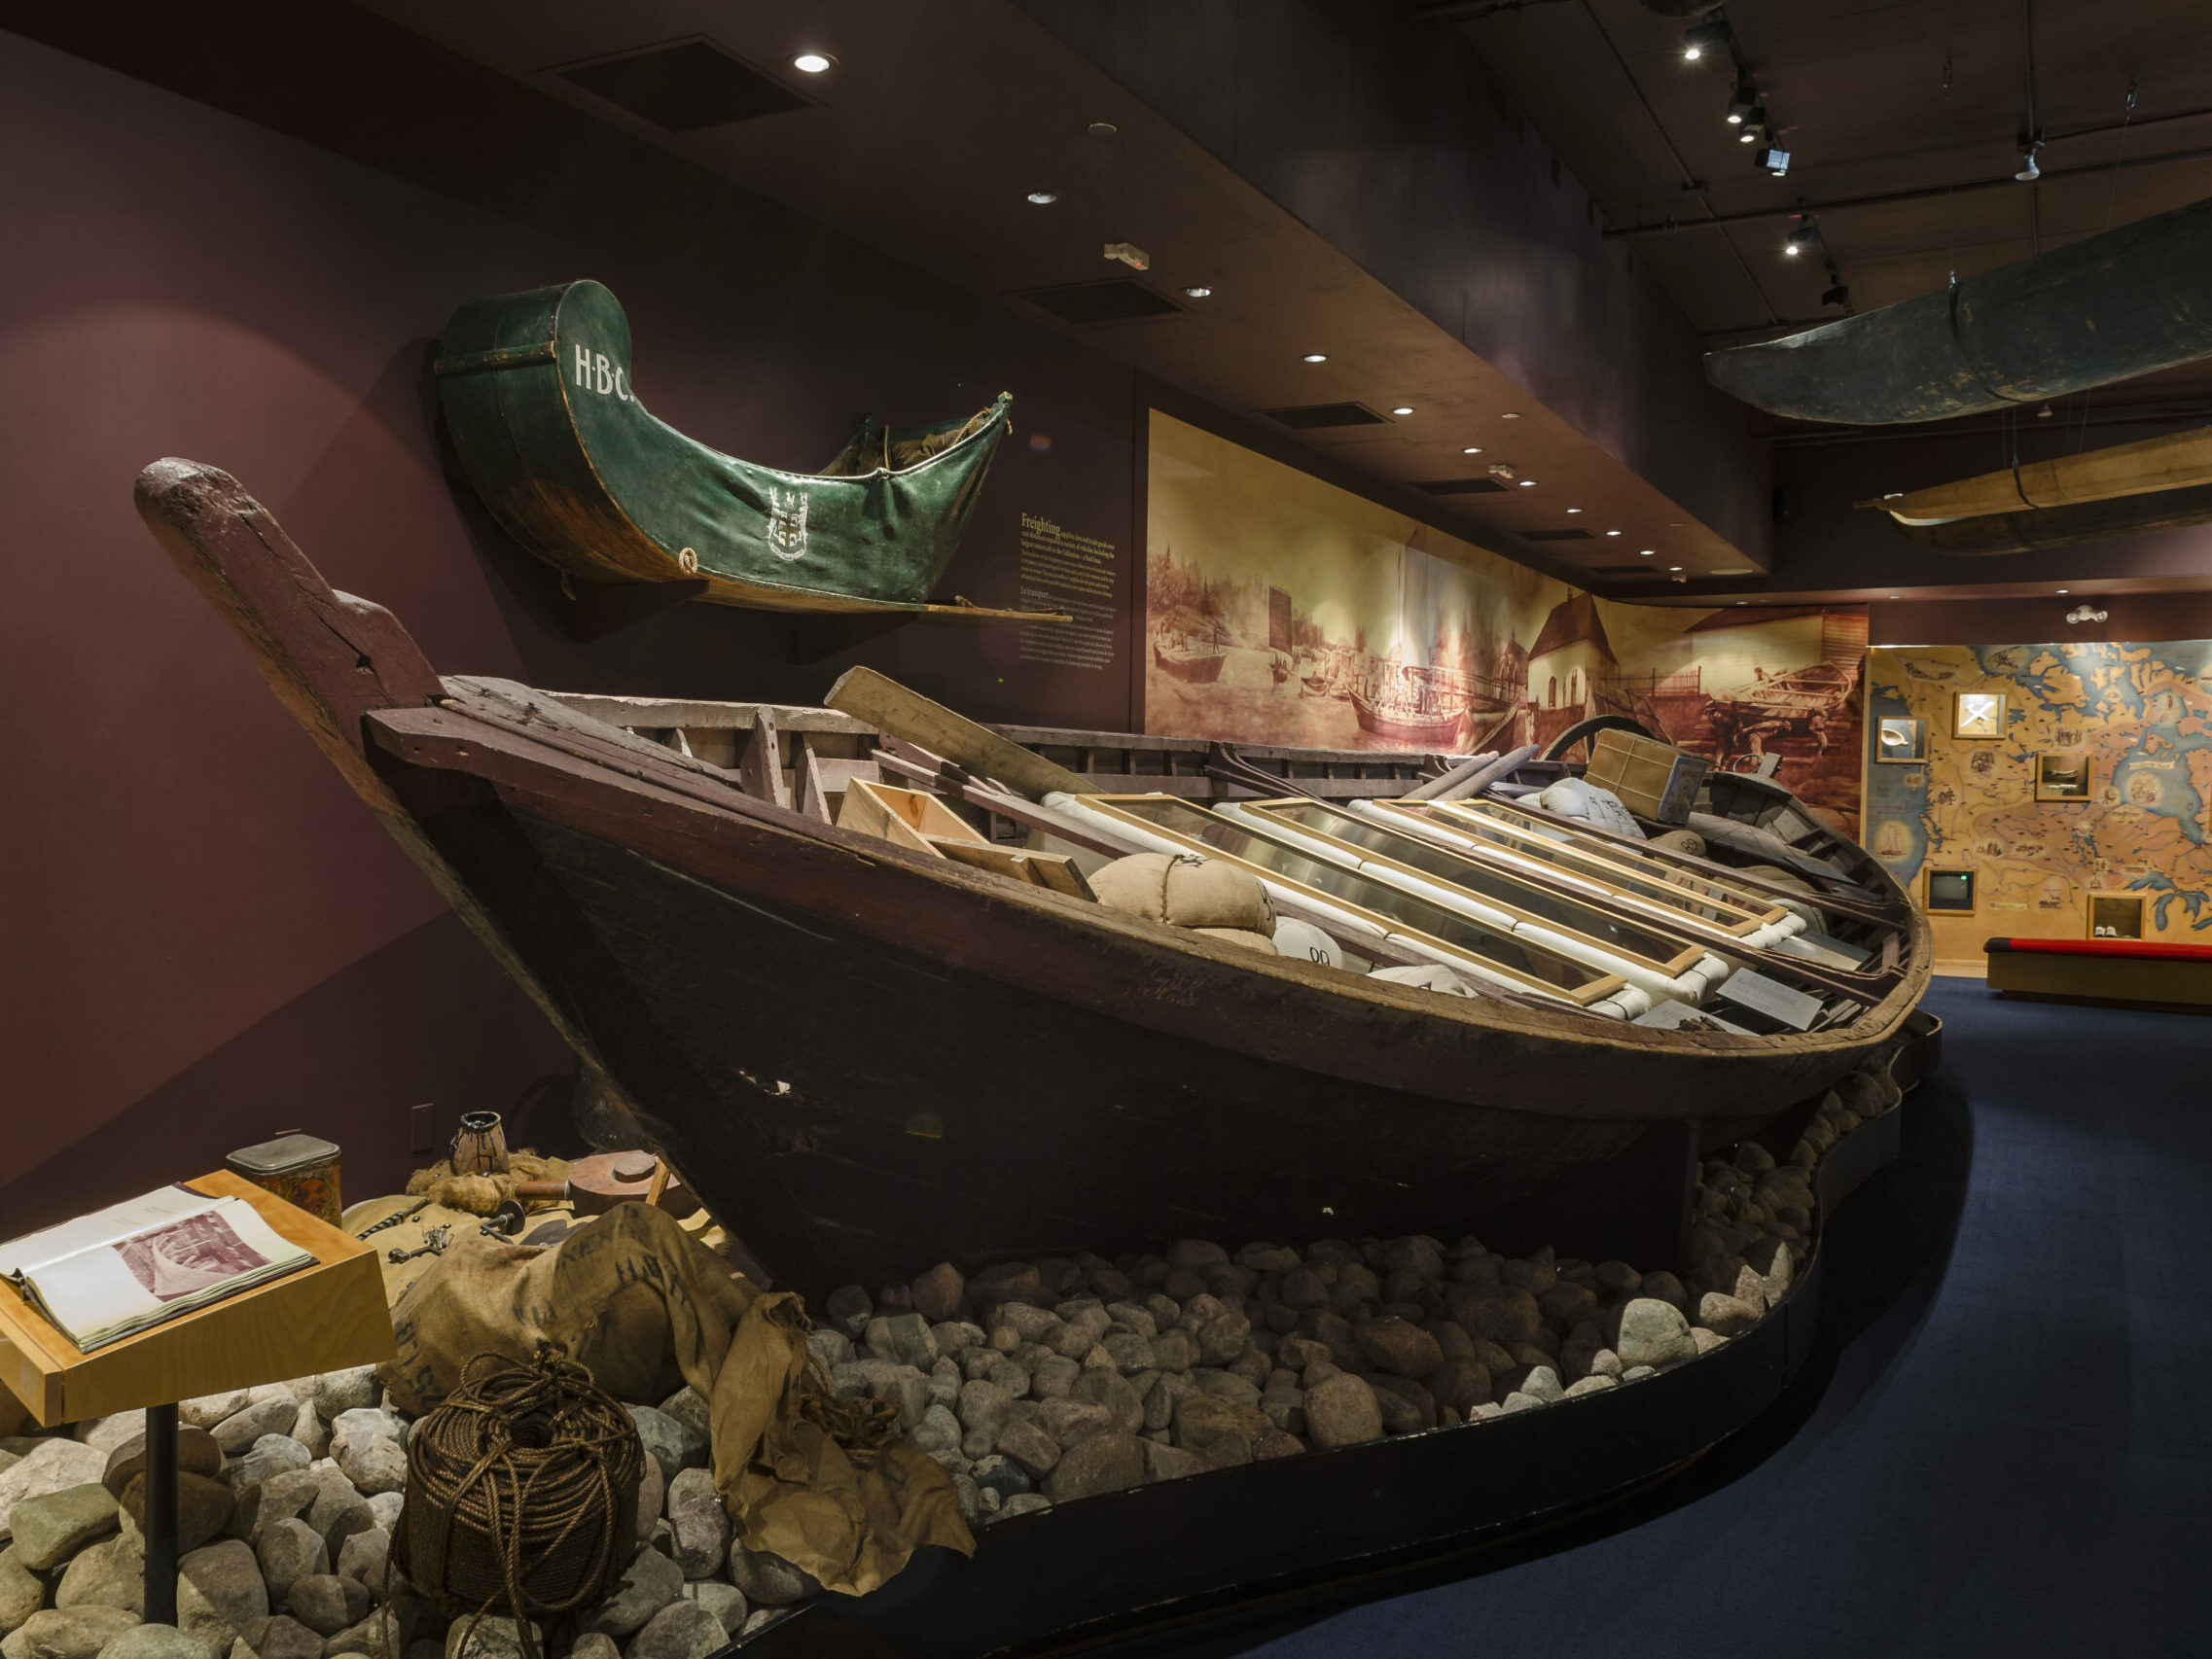 A large York boat is nestled amongst larger rocks with artifact cases inside made to look like fur bales but featuring artifacts related to freighting and transportation. The walls of the gallery are a deep burgundy and there is a mural behind the boat depicting scenes from HBC’s prominent trading post at Norway House.